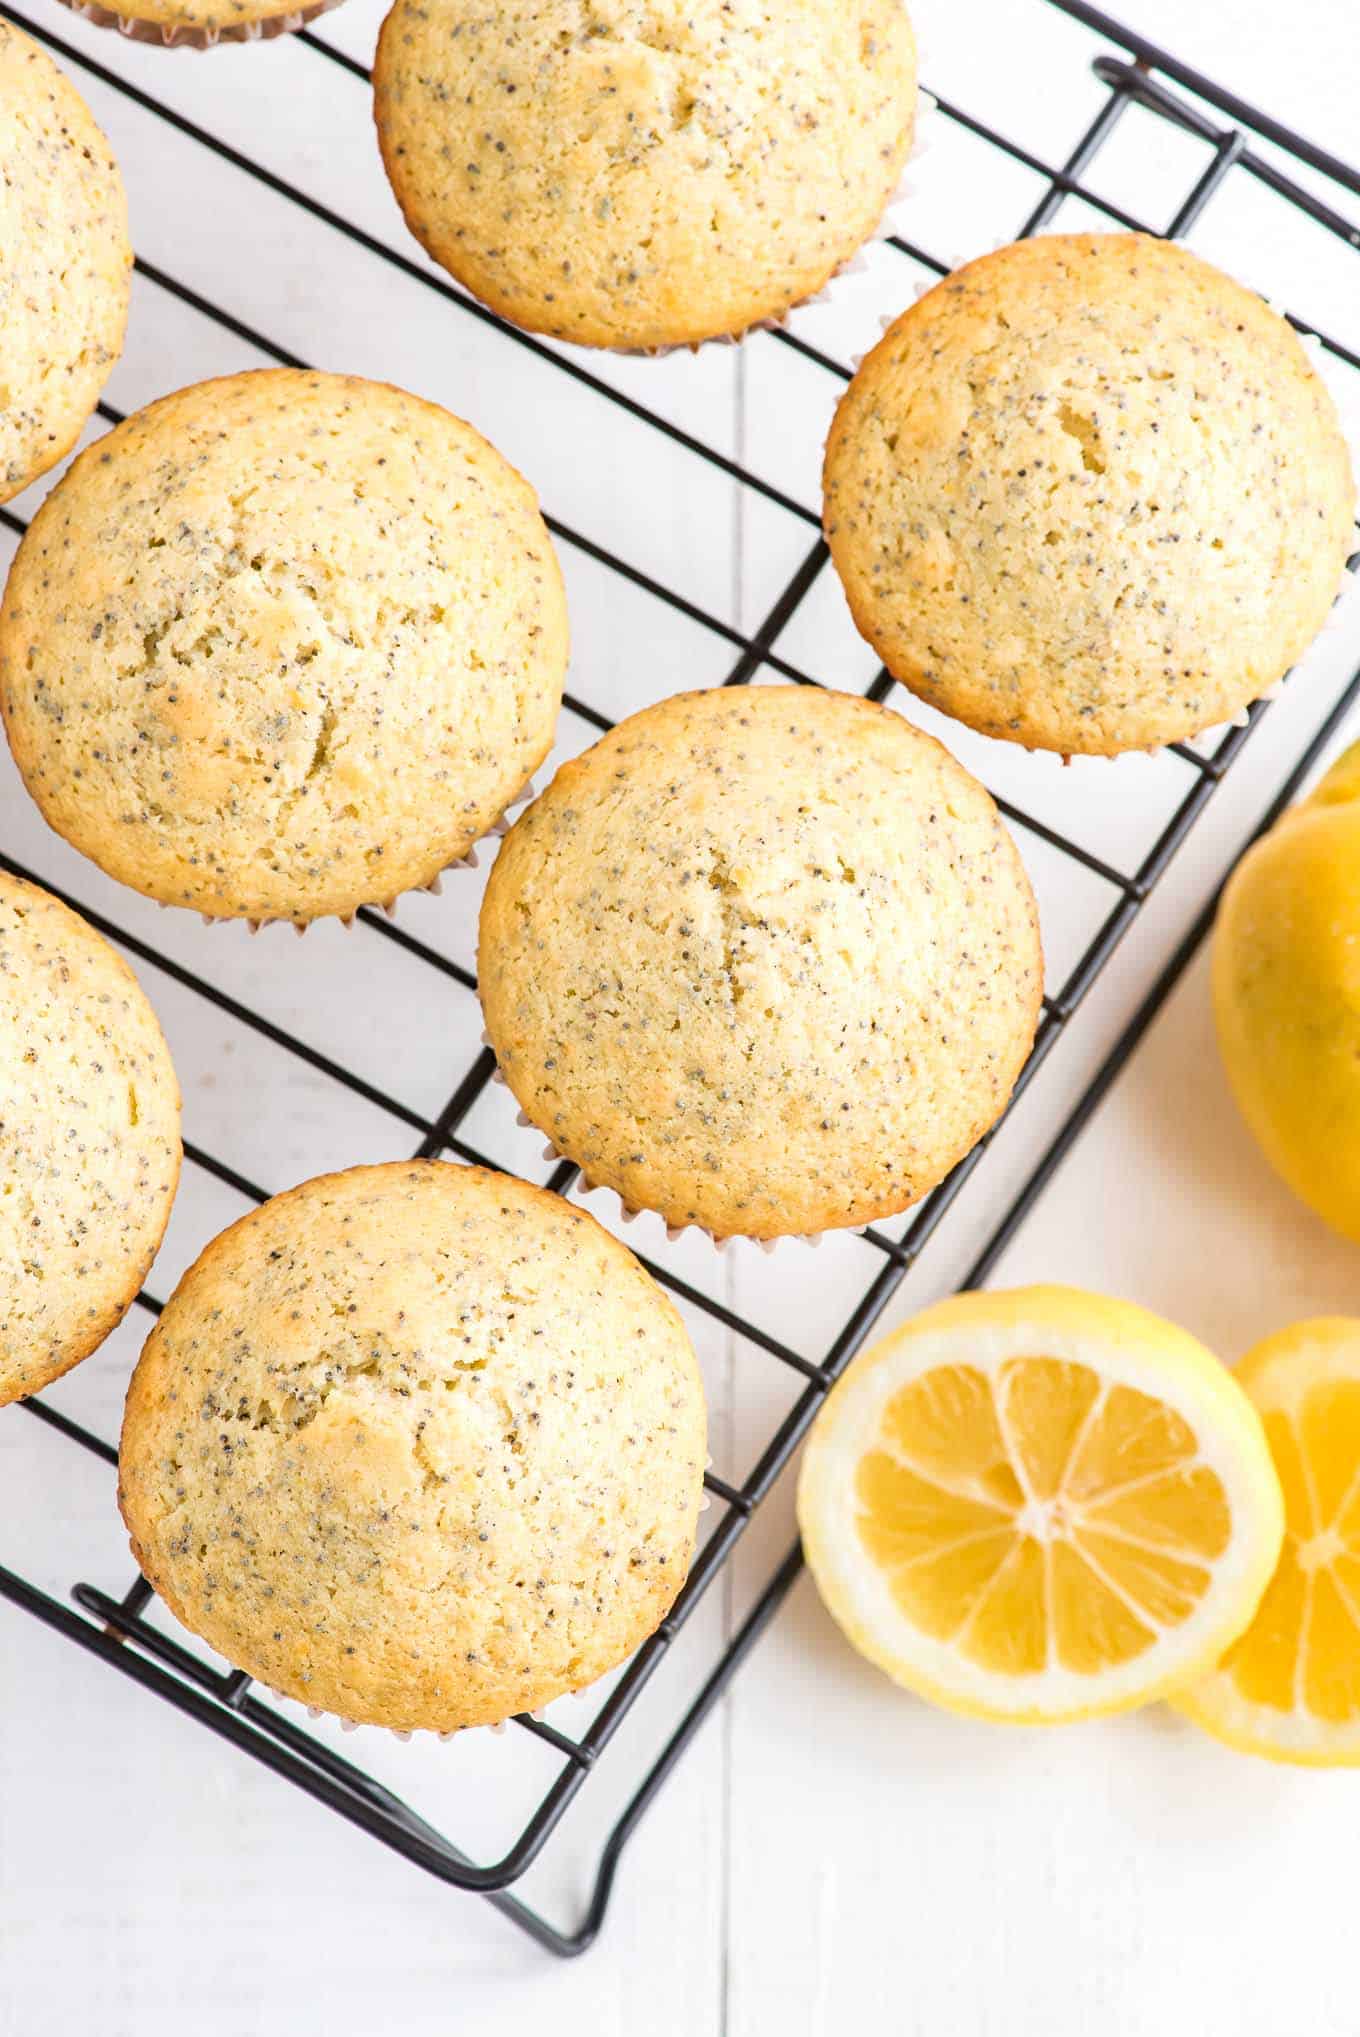 Overhead of muffins on a cooling rack with a lemon and lemon slices next to it.